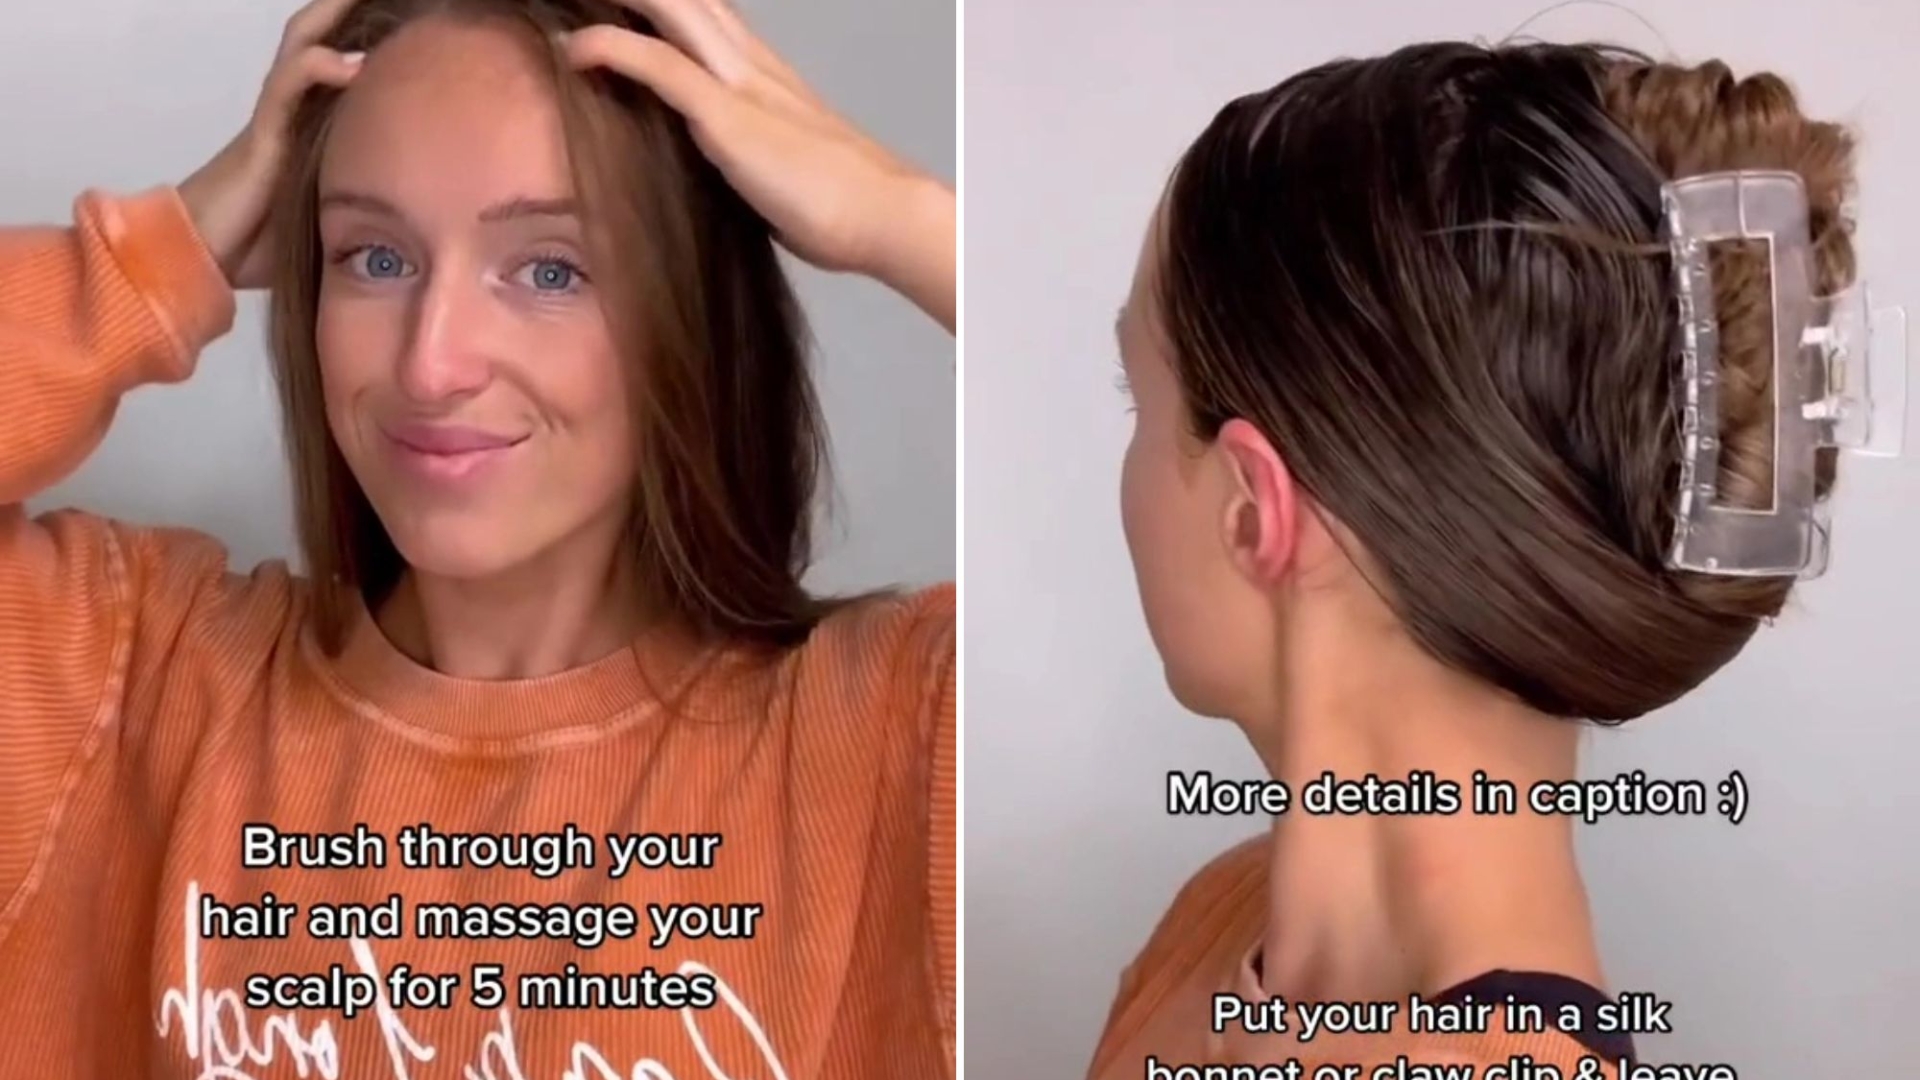 You've been brushing your hair wrong & it's making you bald there's an easy tip